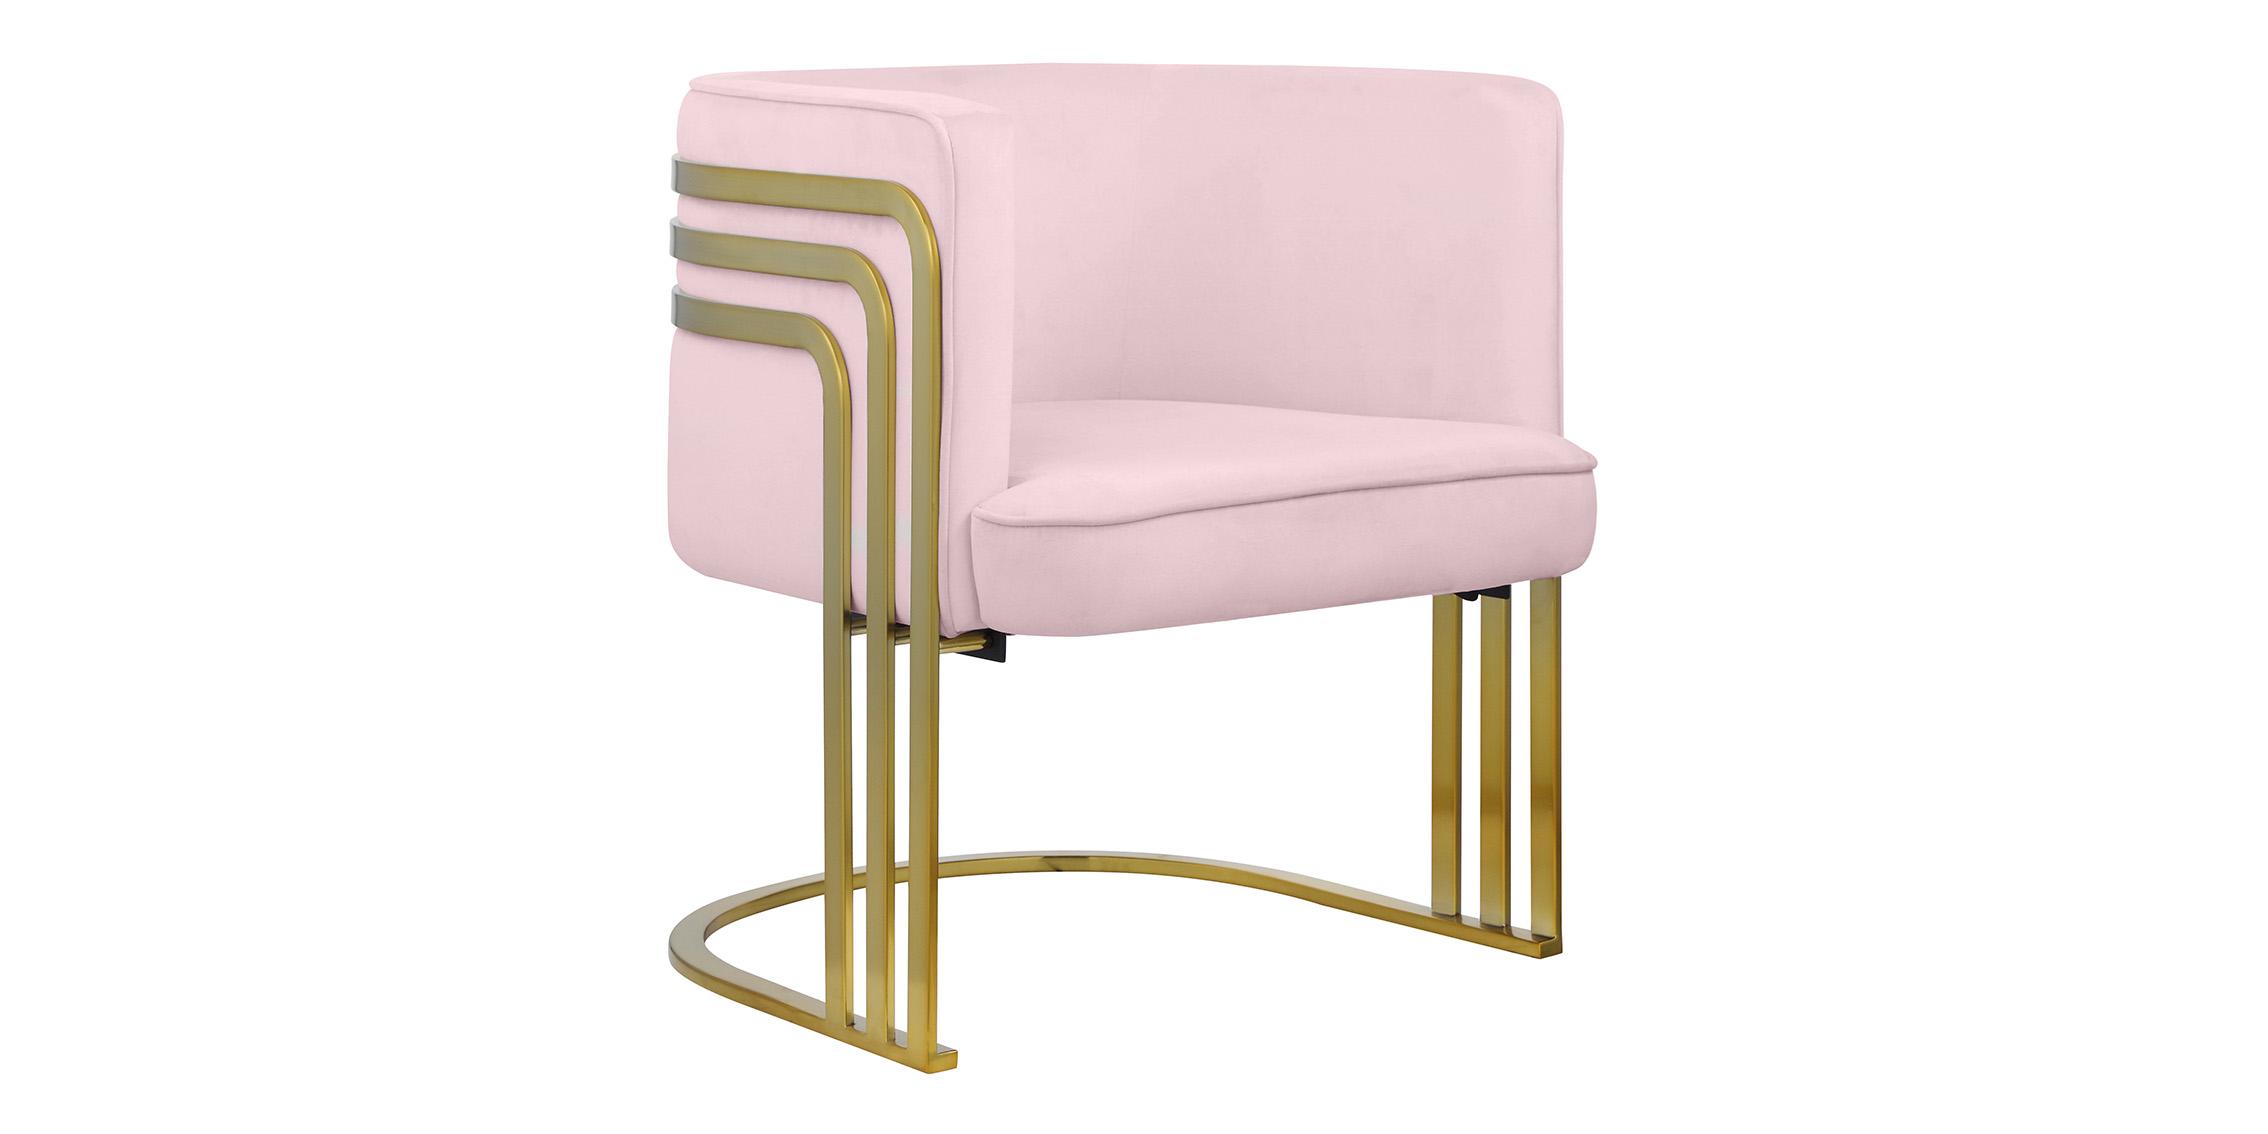 Contemporary Accent Chair RAYS 533Pink 533Pink in Pink, Gold Velvet